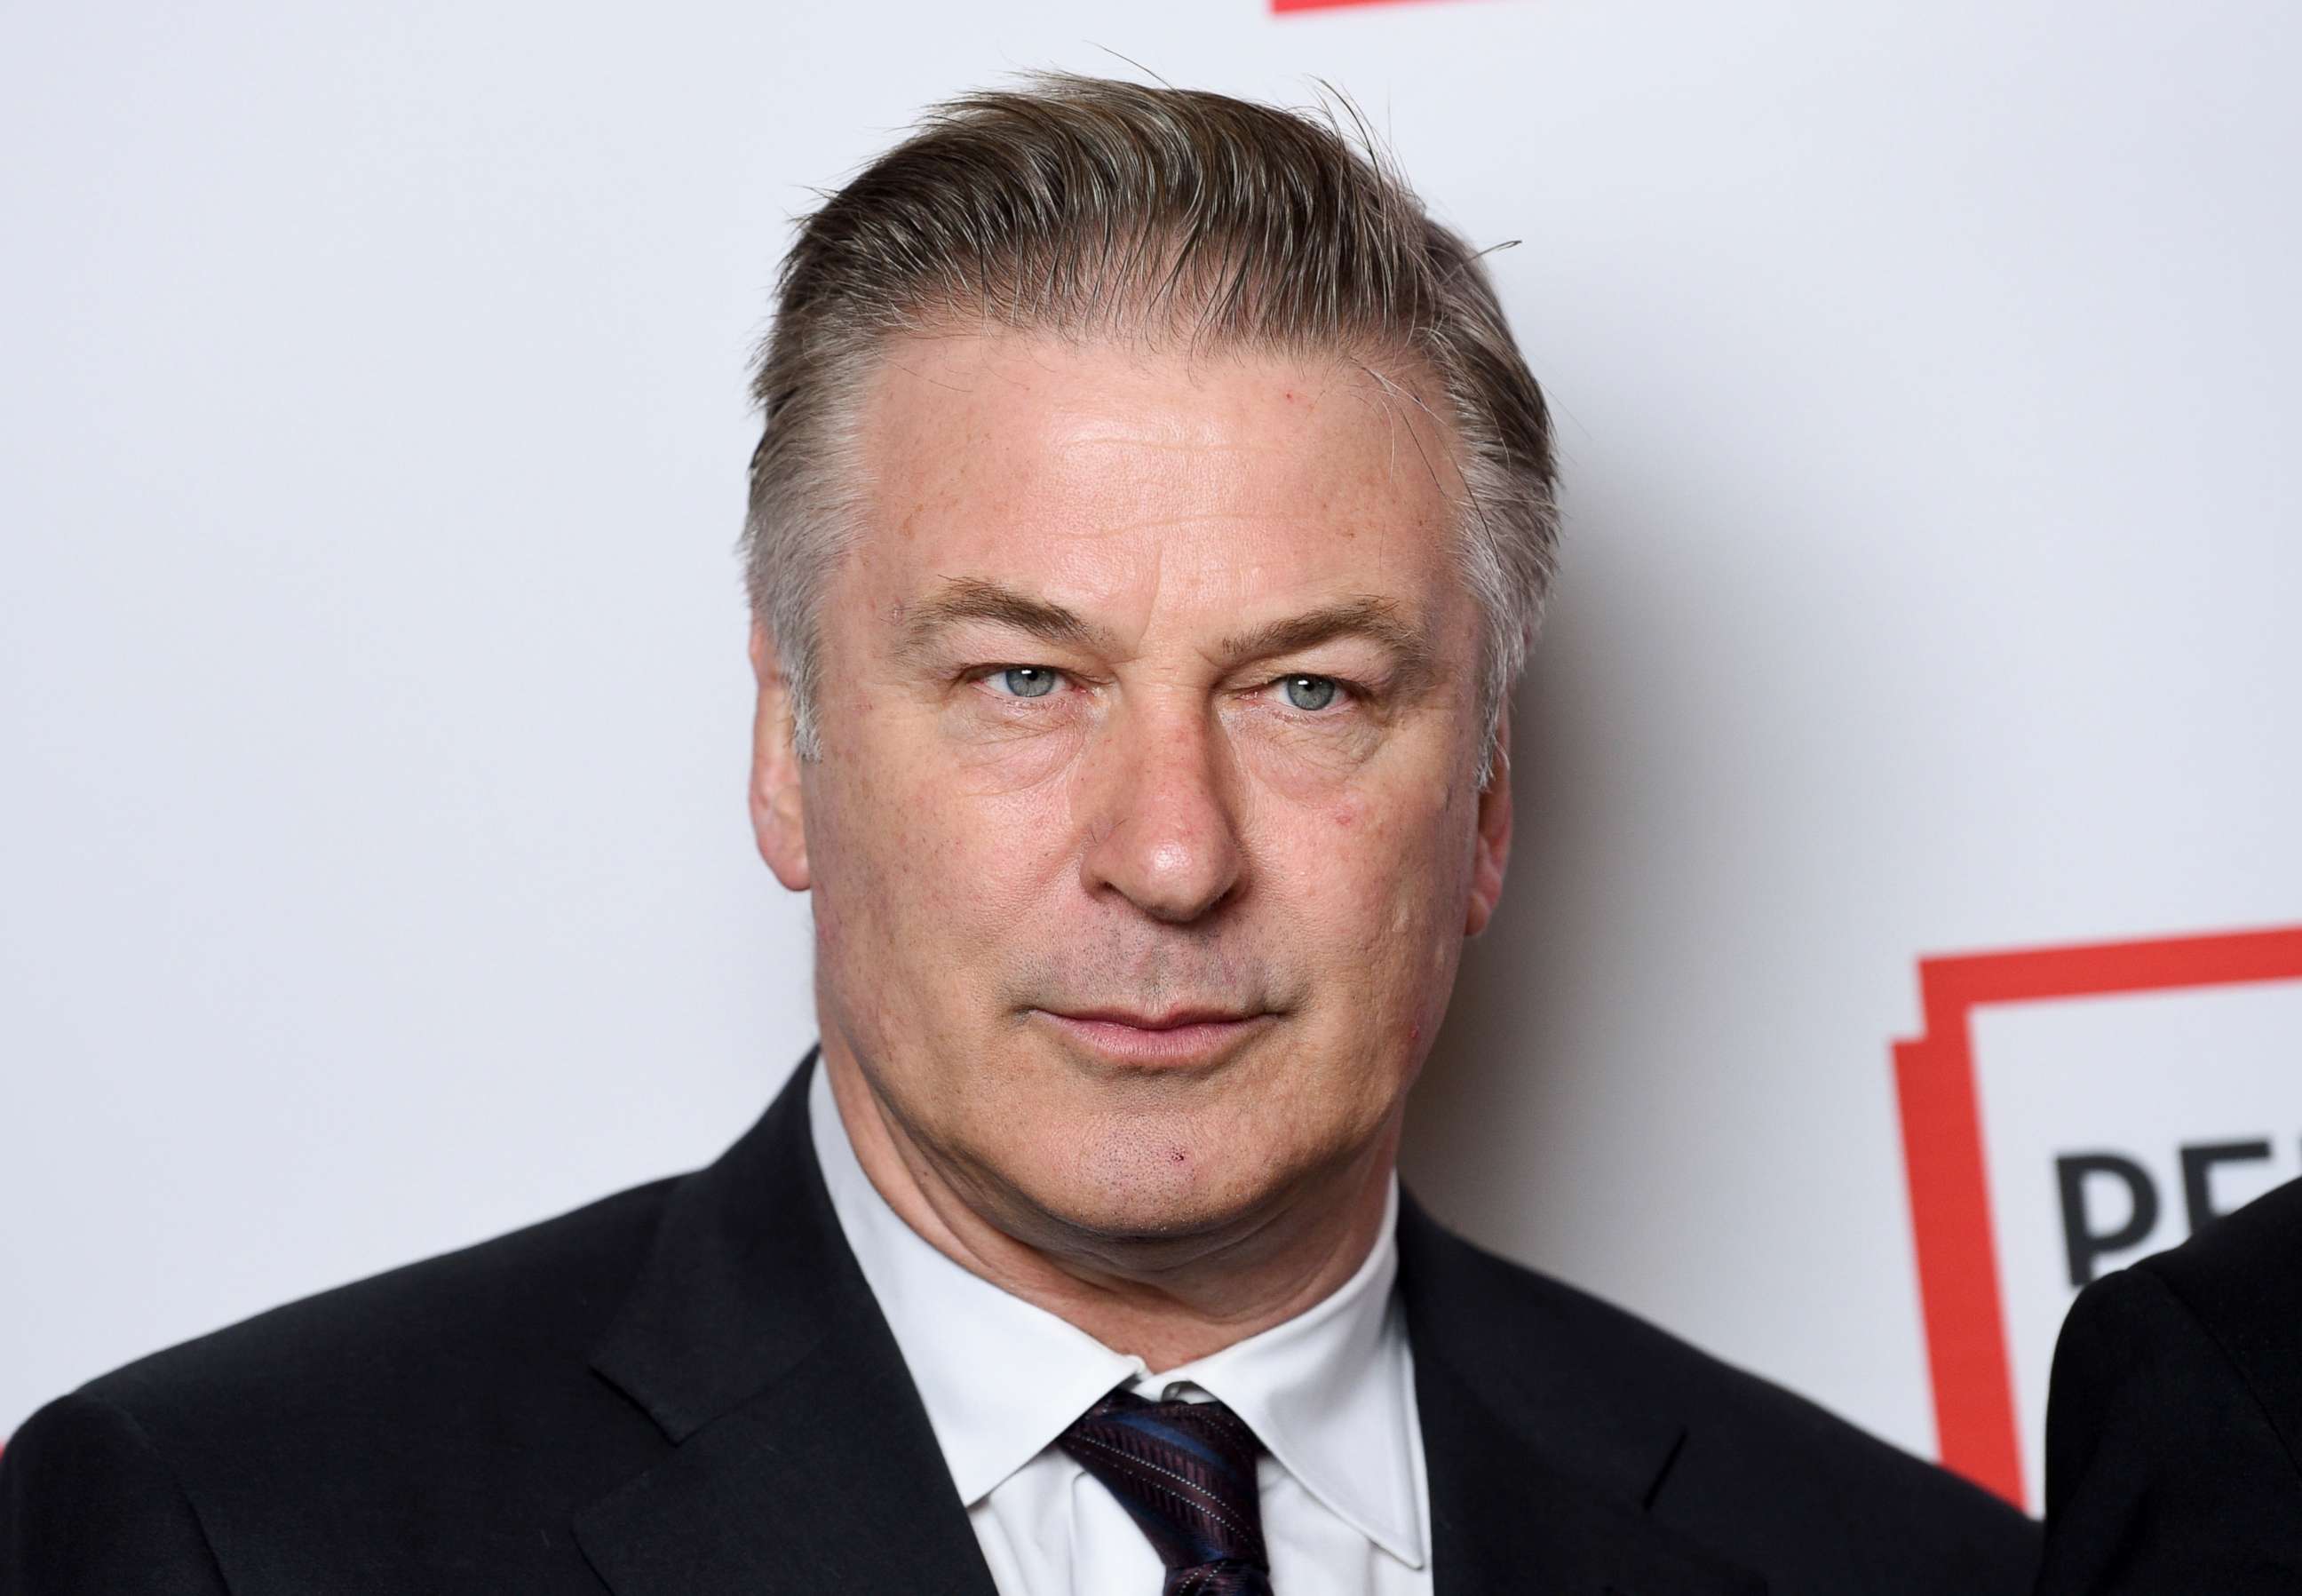 PHOTO: Actor Alec Baldwin attends the 2019 PEN America Literary Gala In New York on May 21, 2019.